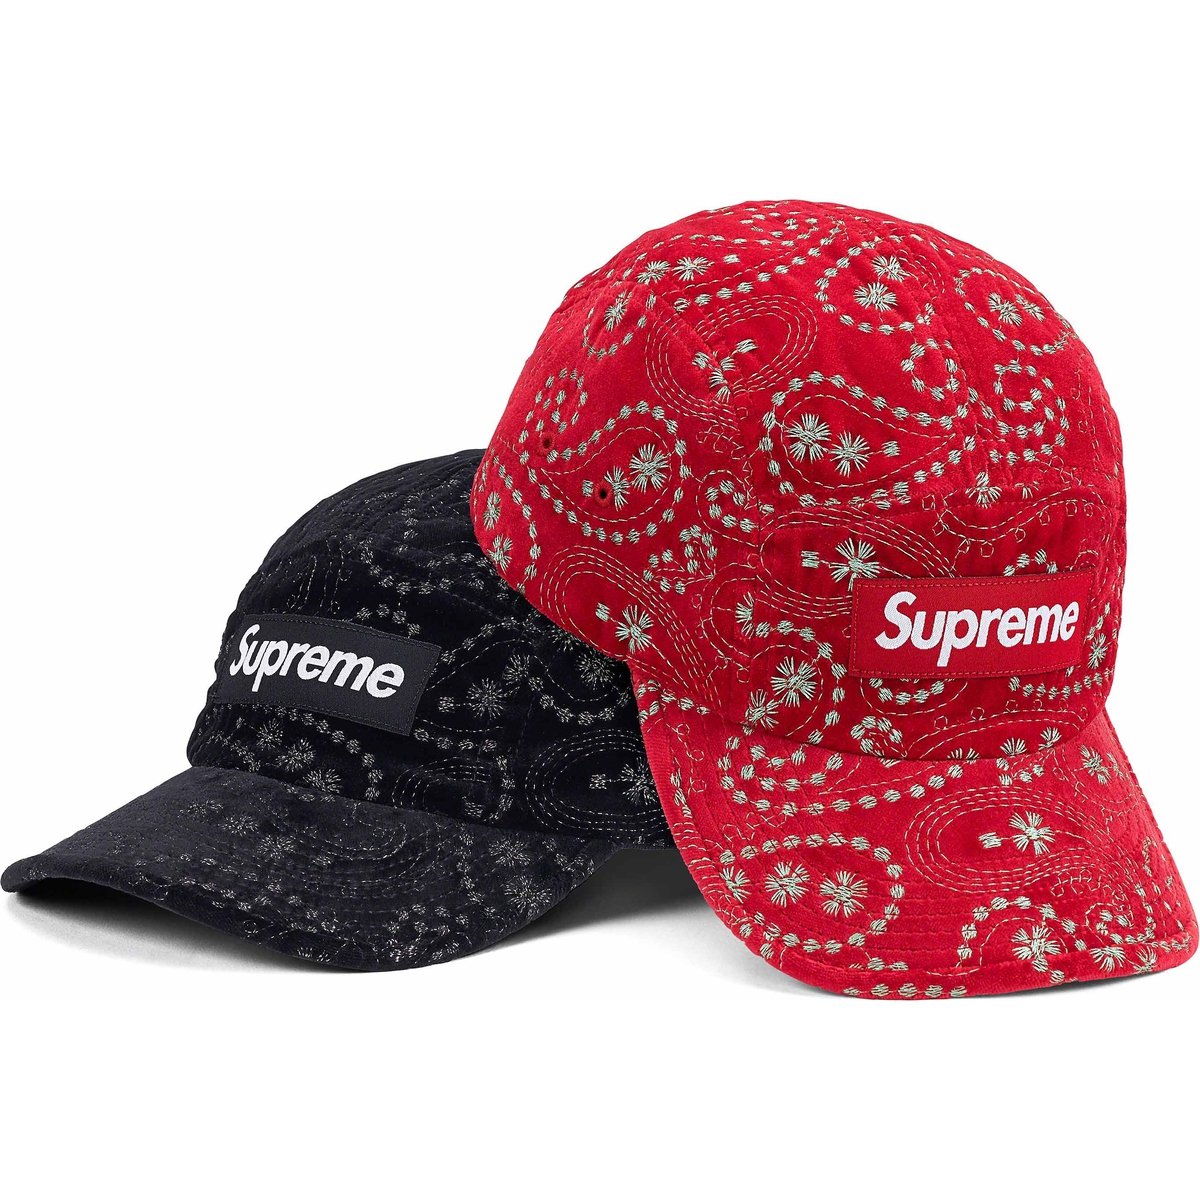 Items left to drop during fall-winter 2023 season - Supreme